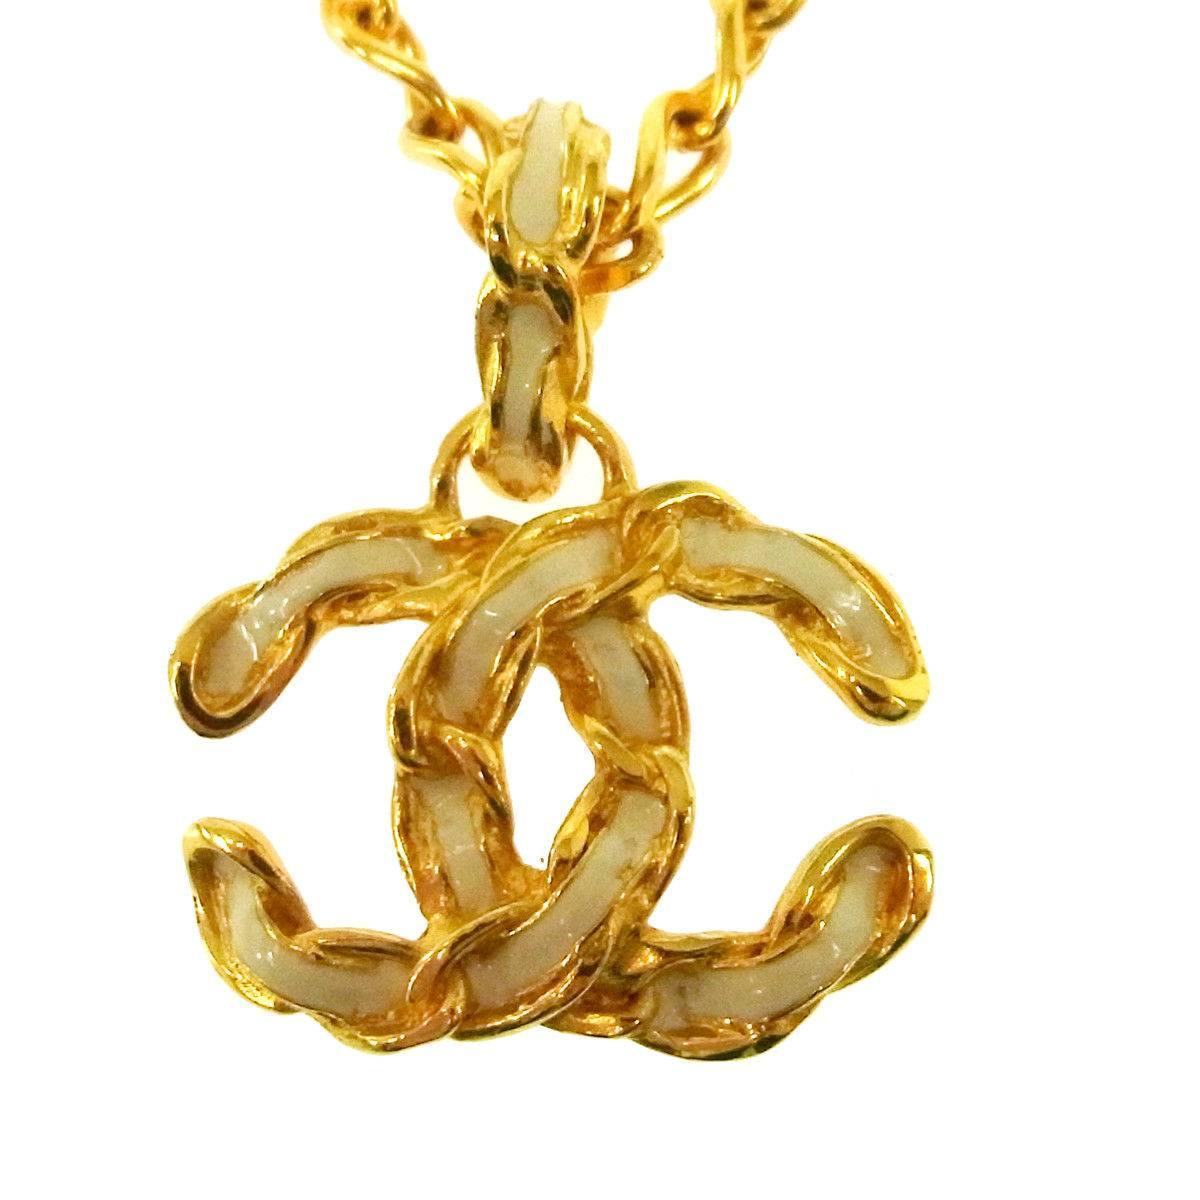 Women's Chanel Textured Gold Chain Link White Enamel Charm Evening Necklace in Box